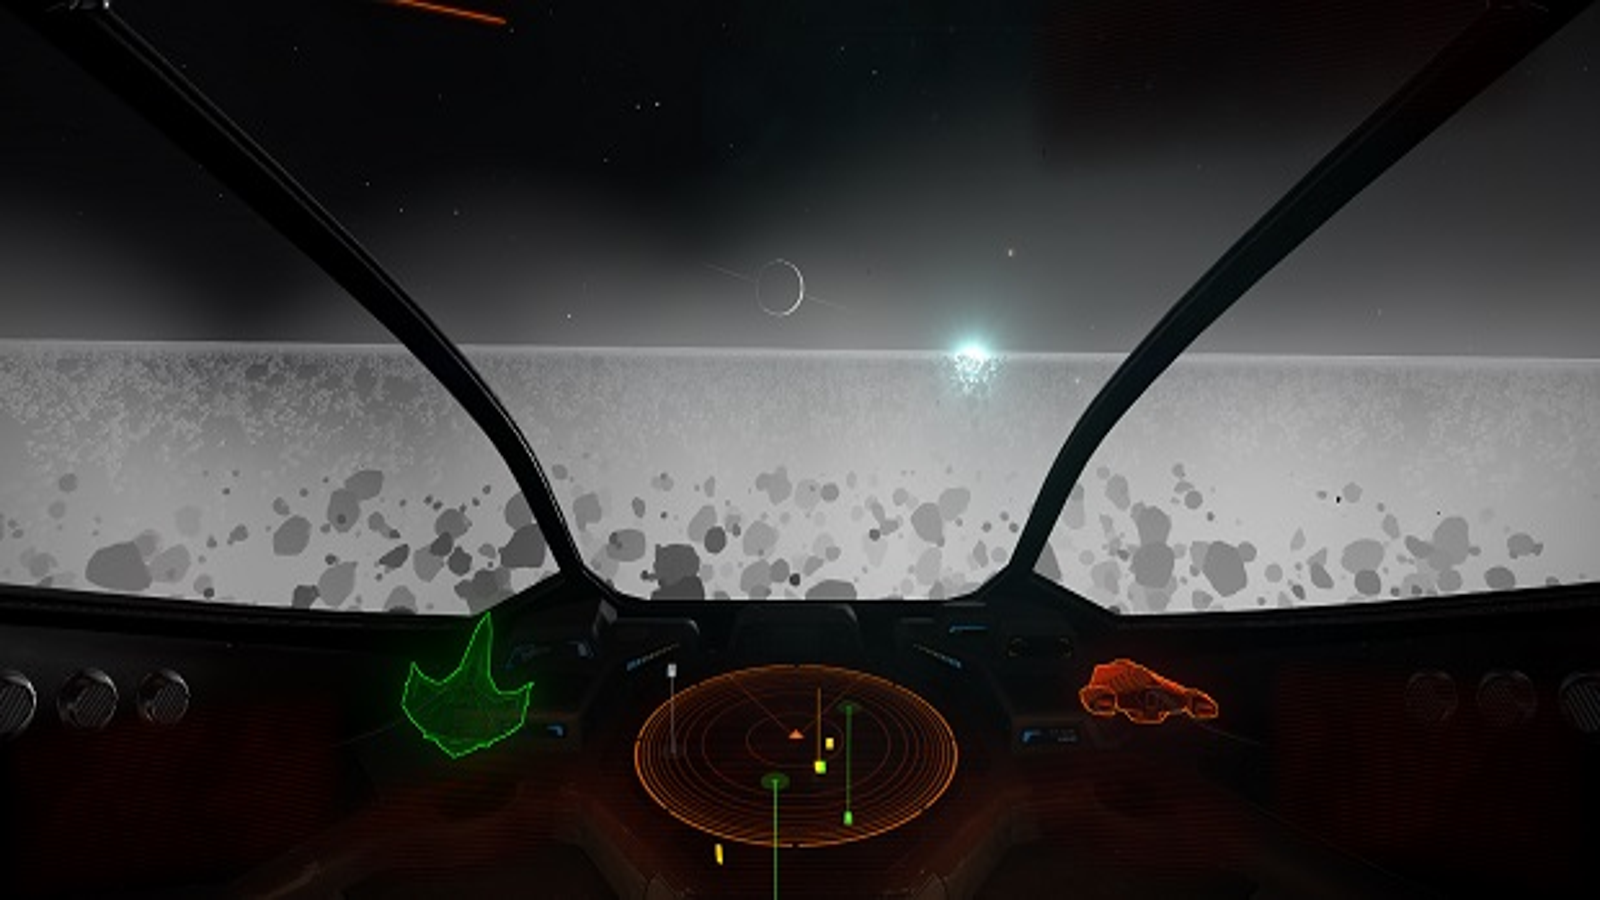 Stick and Rudder: This is not an Elite: Dangerous review